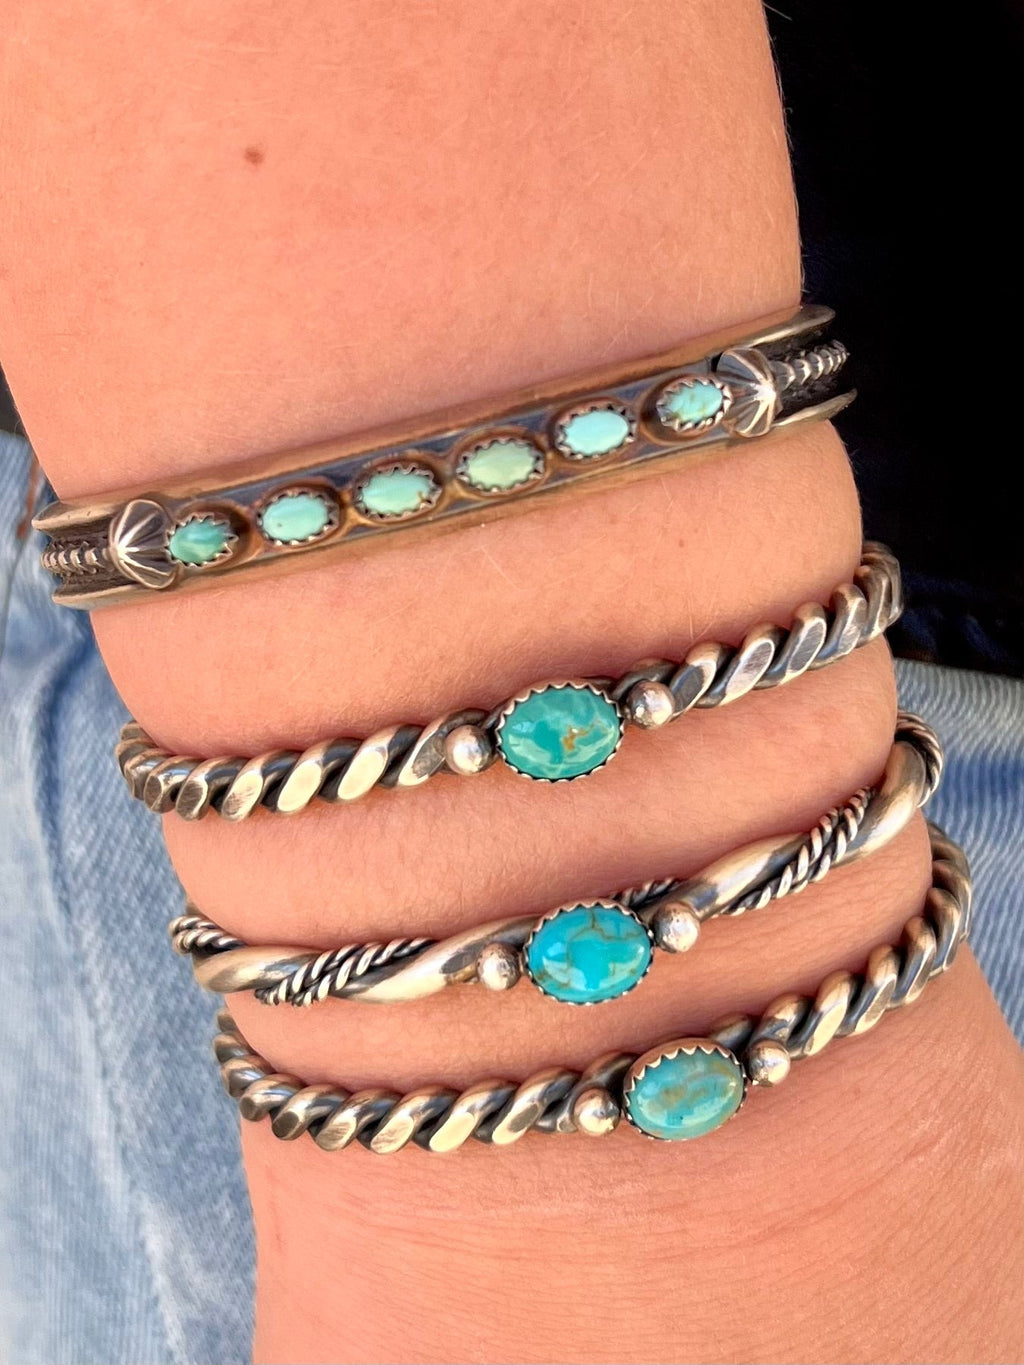 Navajo, Genuine Sterling Silver, Cuff, Bracelets, Authentic Turquoise Stones. Small Business. Get Gussied Up. Woman Owned Boutique. 